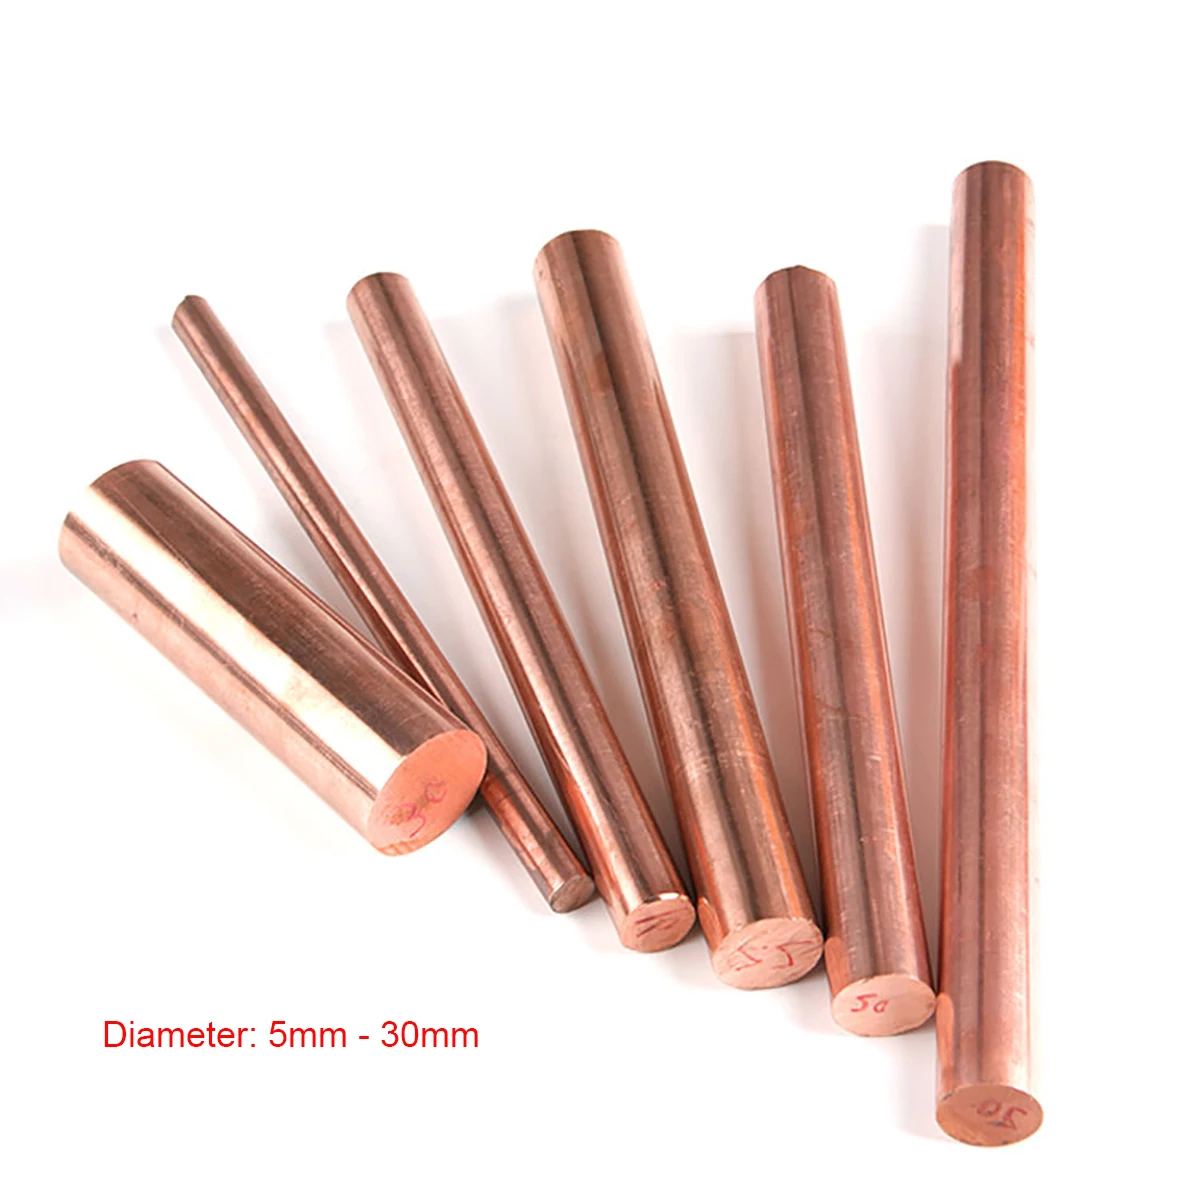 5X Solid Round Copper Rods Bar Cylinder 3mm Diameter Length 100mm Metalworking 